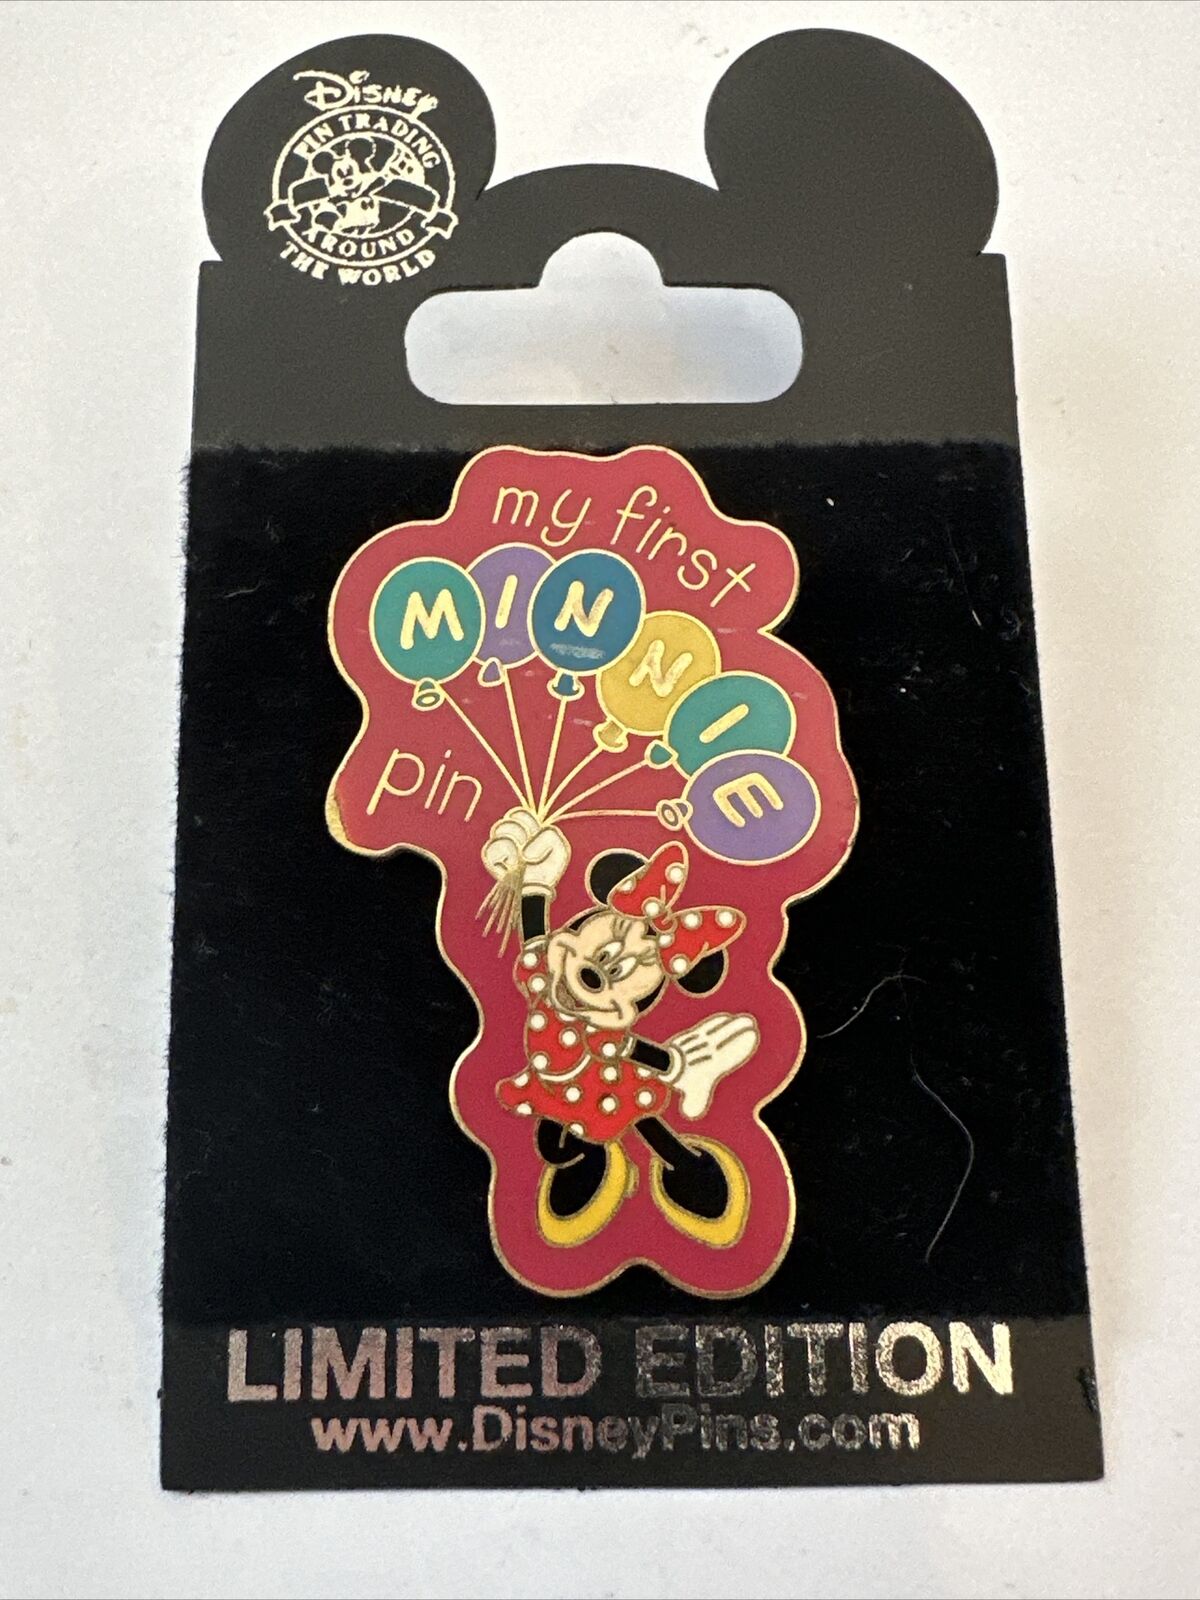 Disney World My First Minnie Mouse Pin